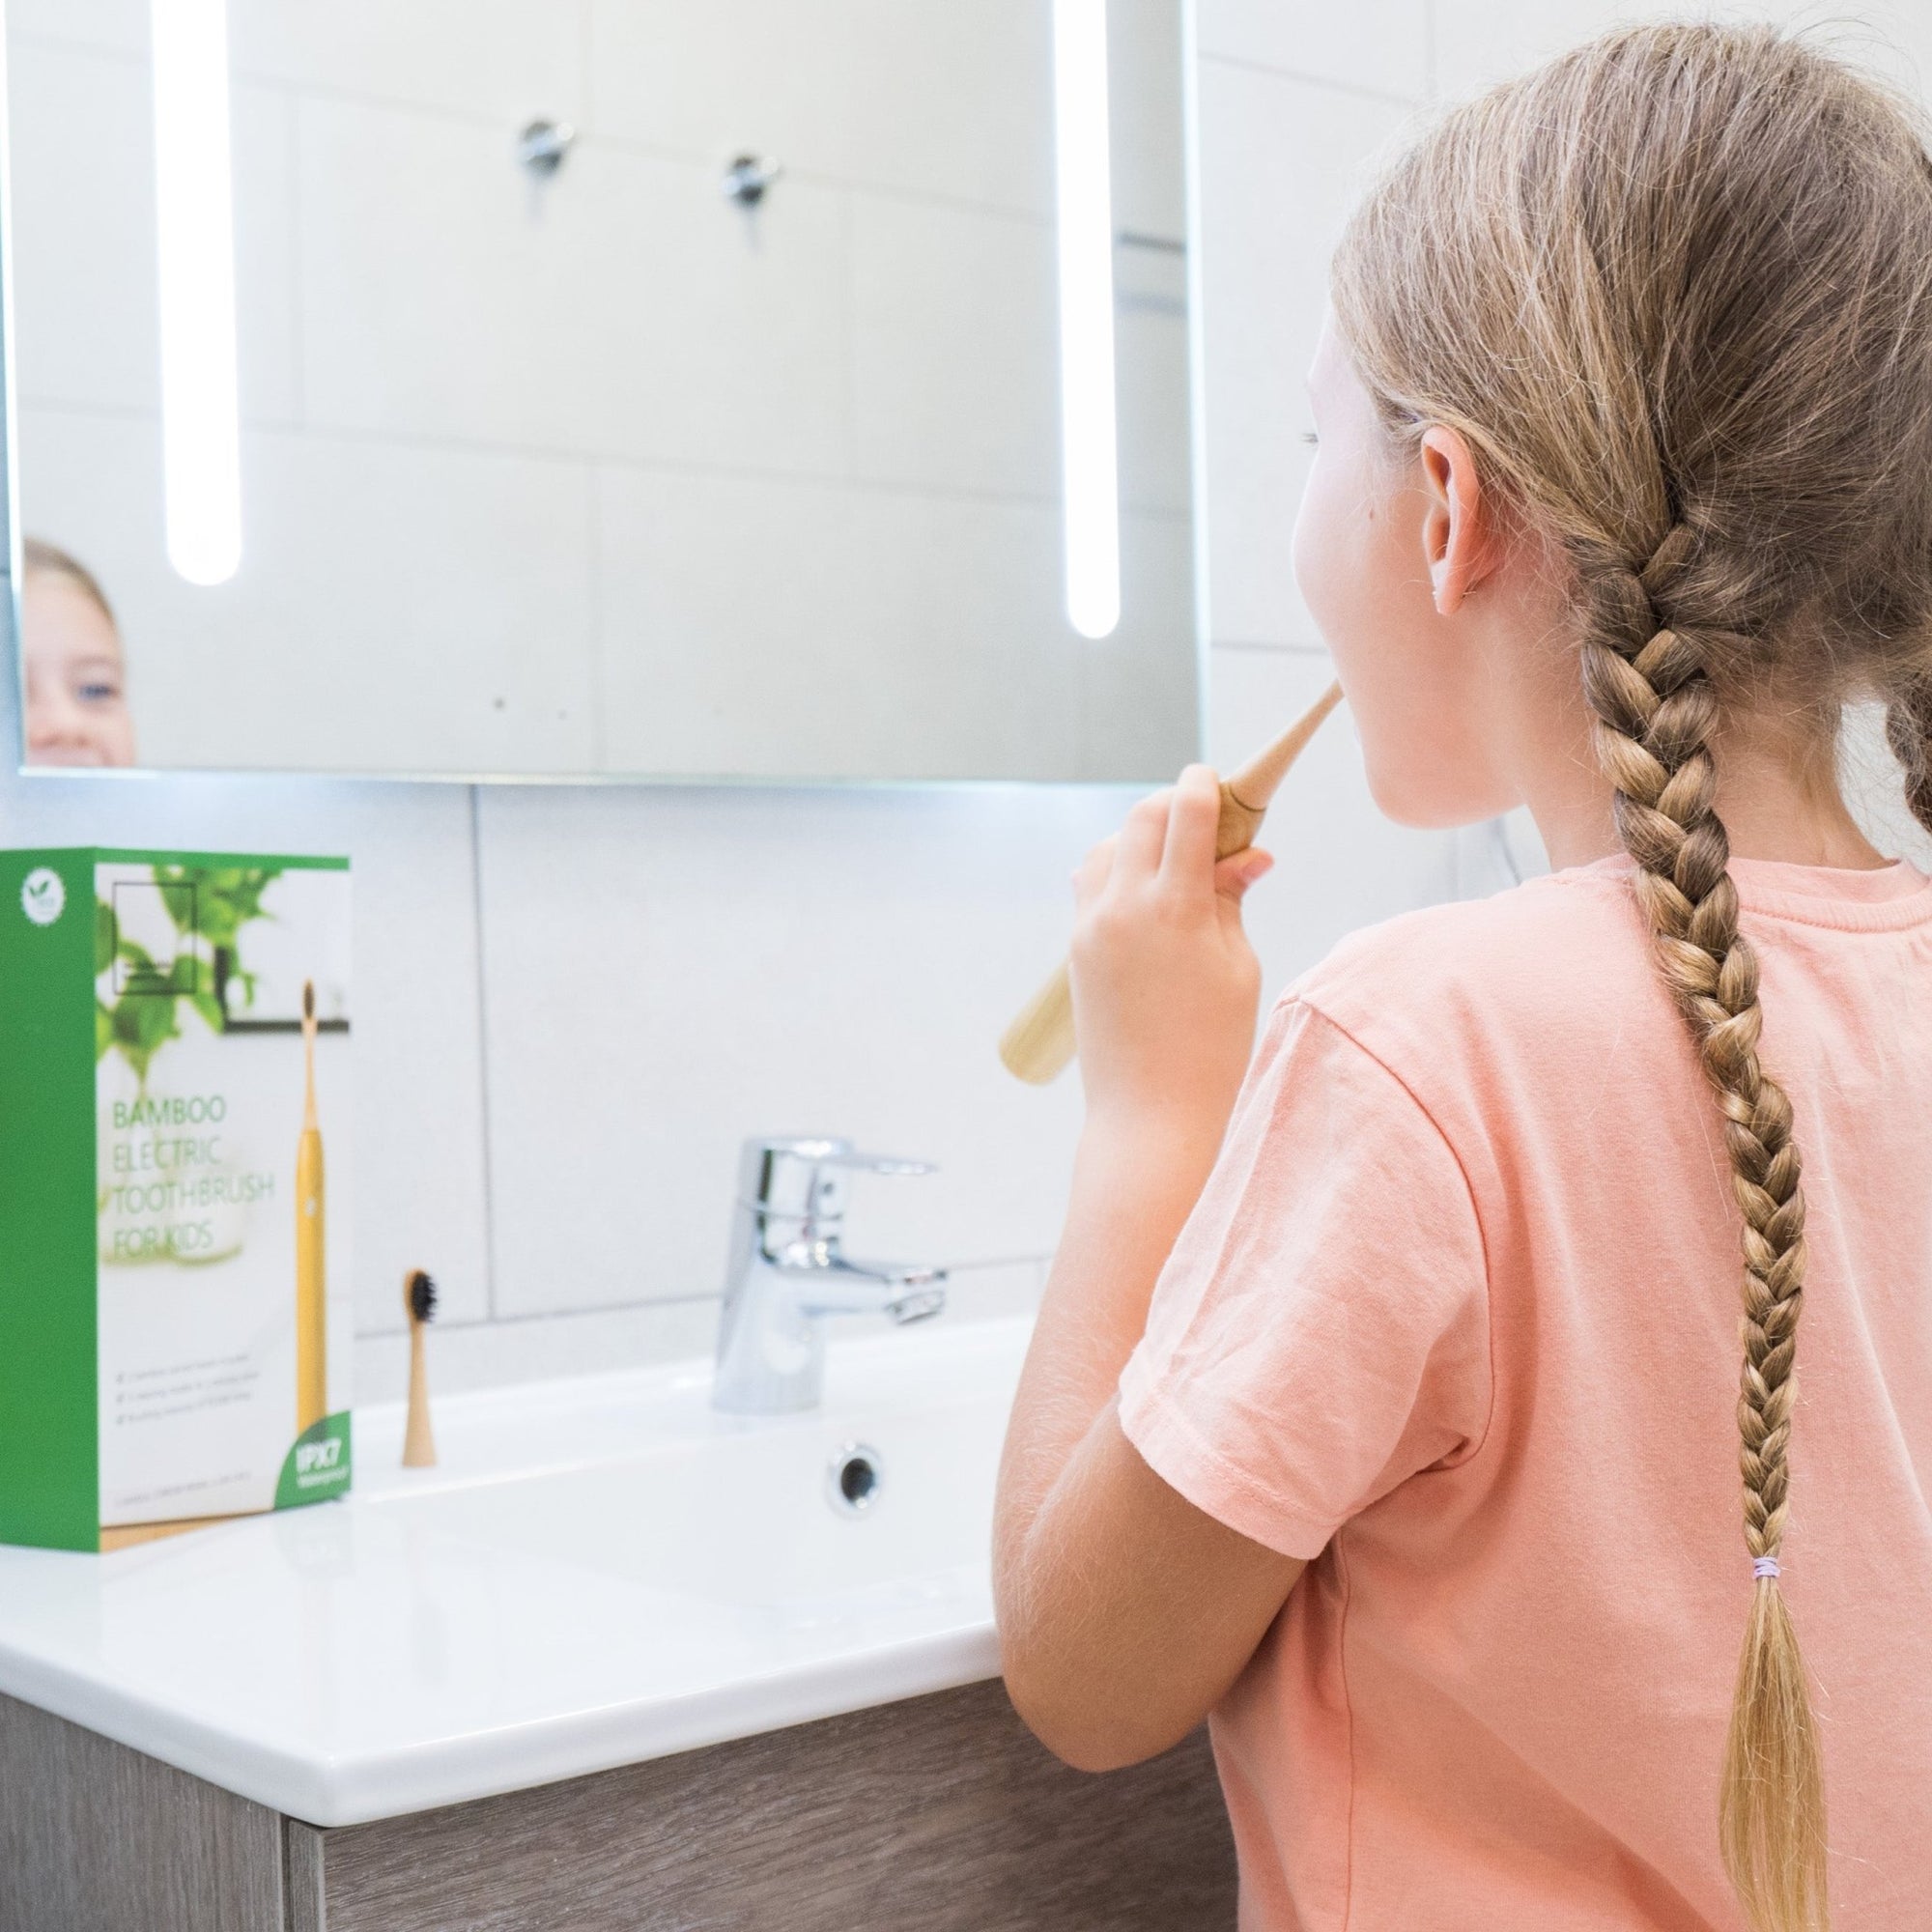 Junior Bamboo Electric Toothbrush - Sustainable Tomorrow